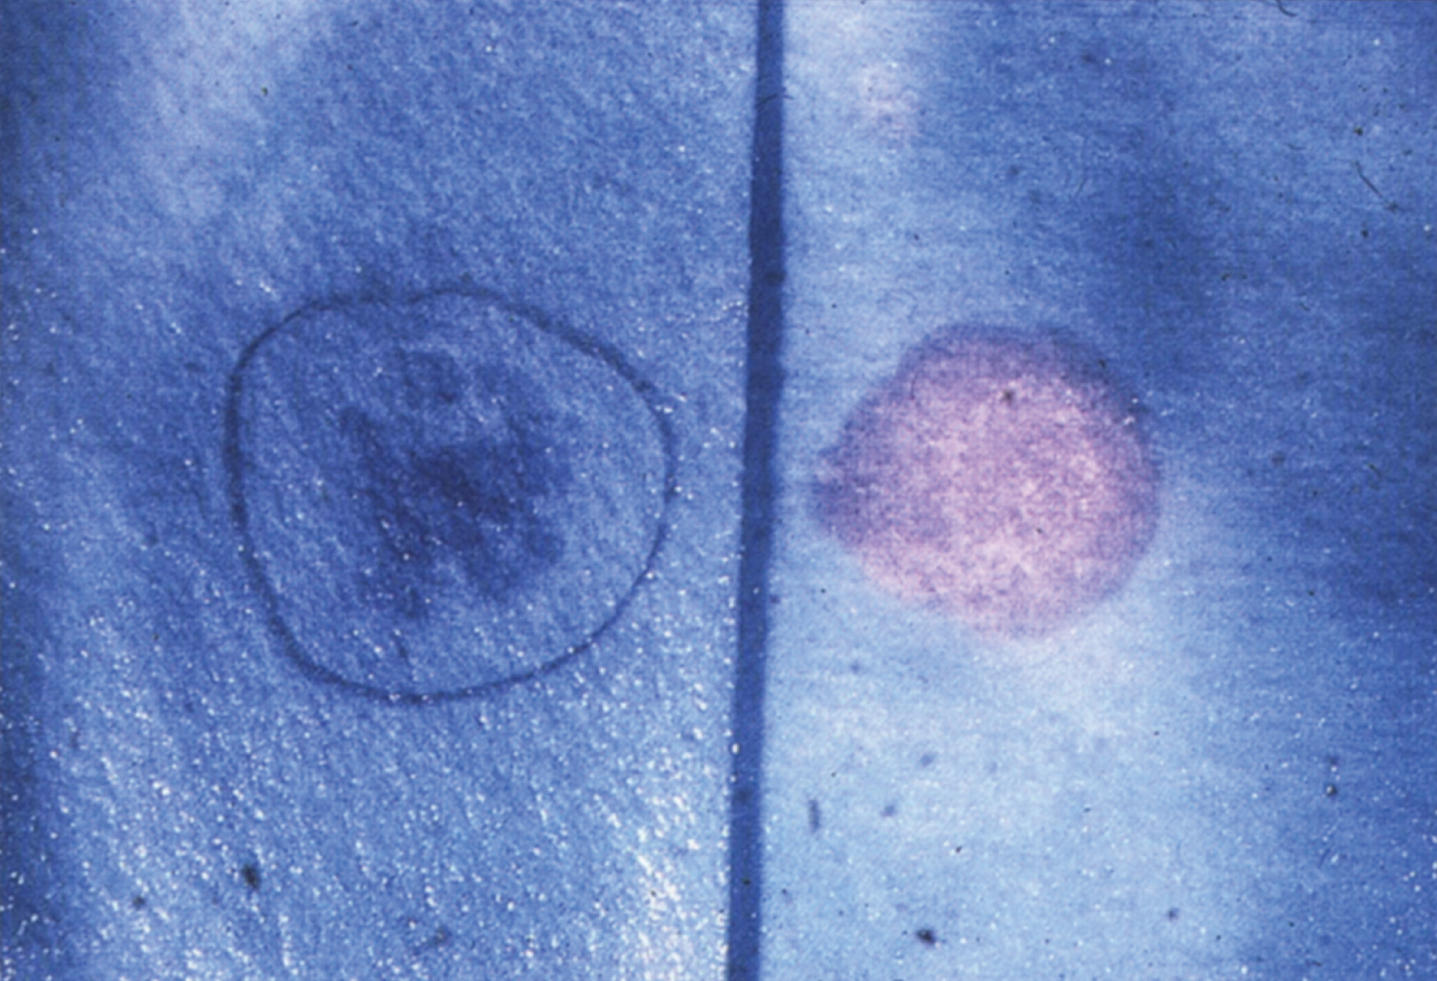 Metachromatic leukodystrophy. Urinary spot test showing metachromasia due to the presence of sulfatide (right) compared to normal (left).